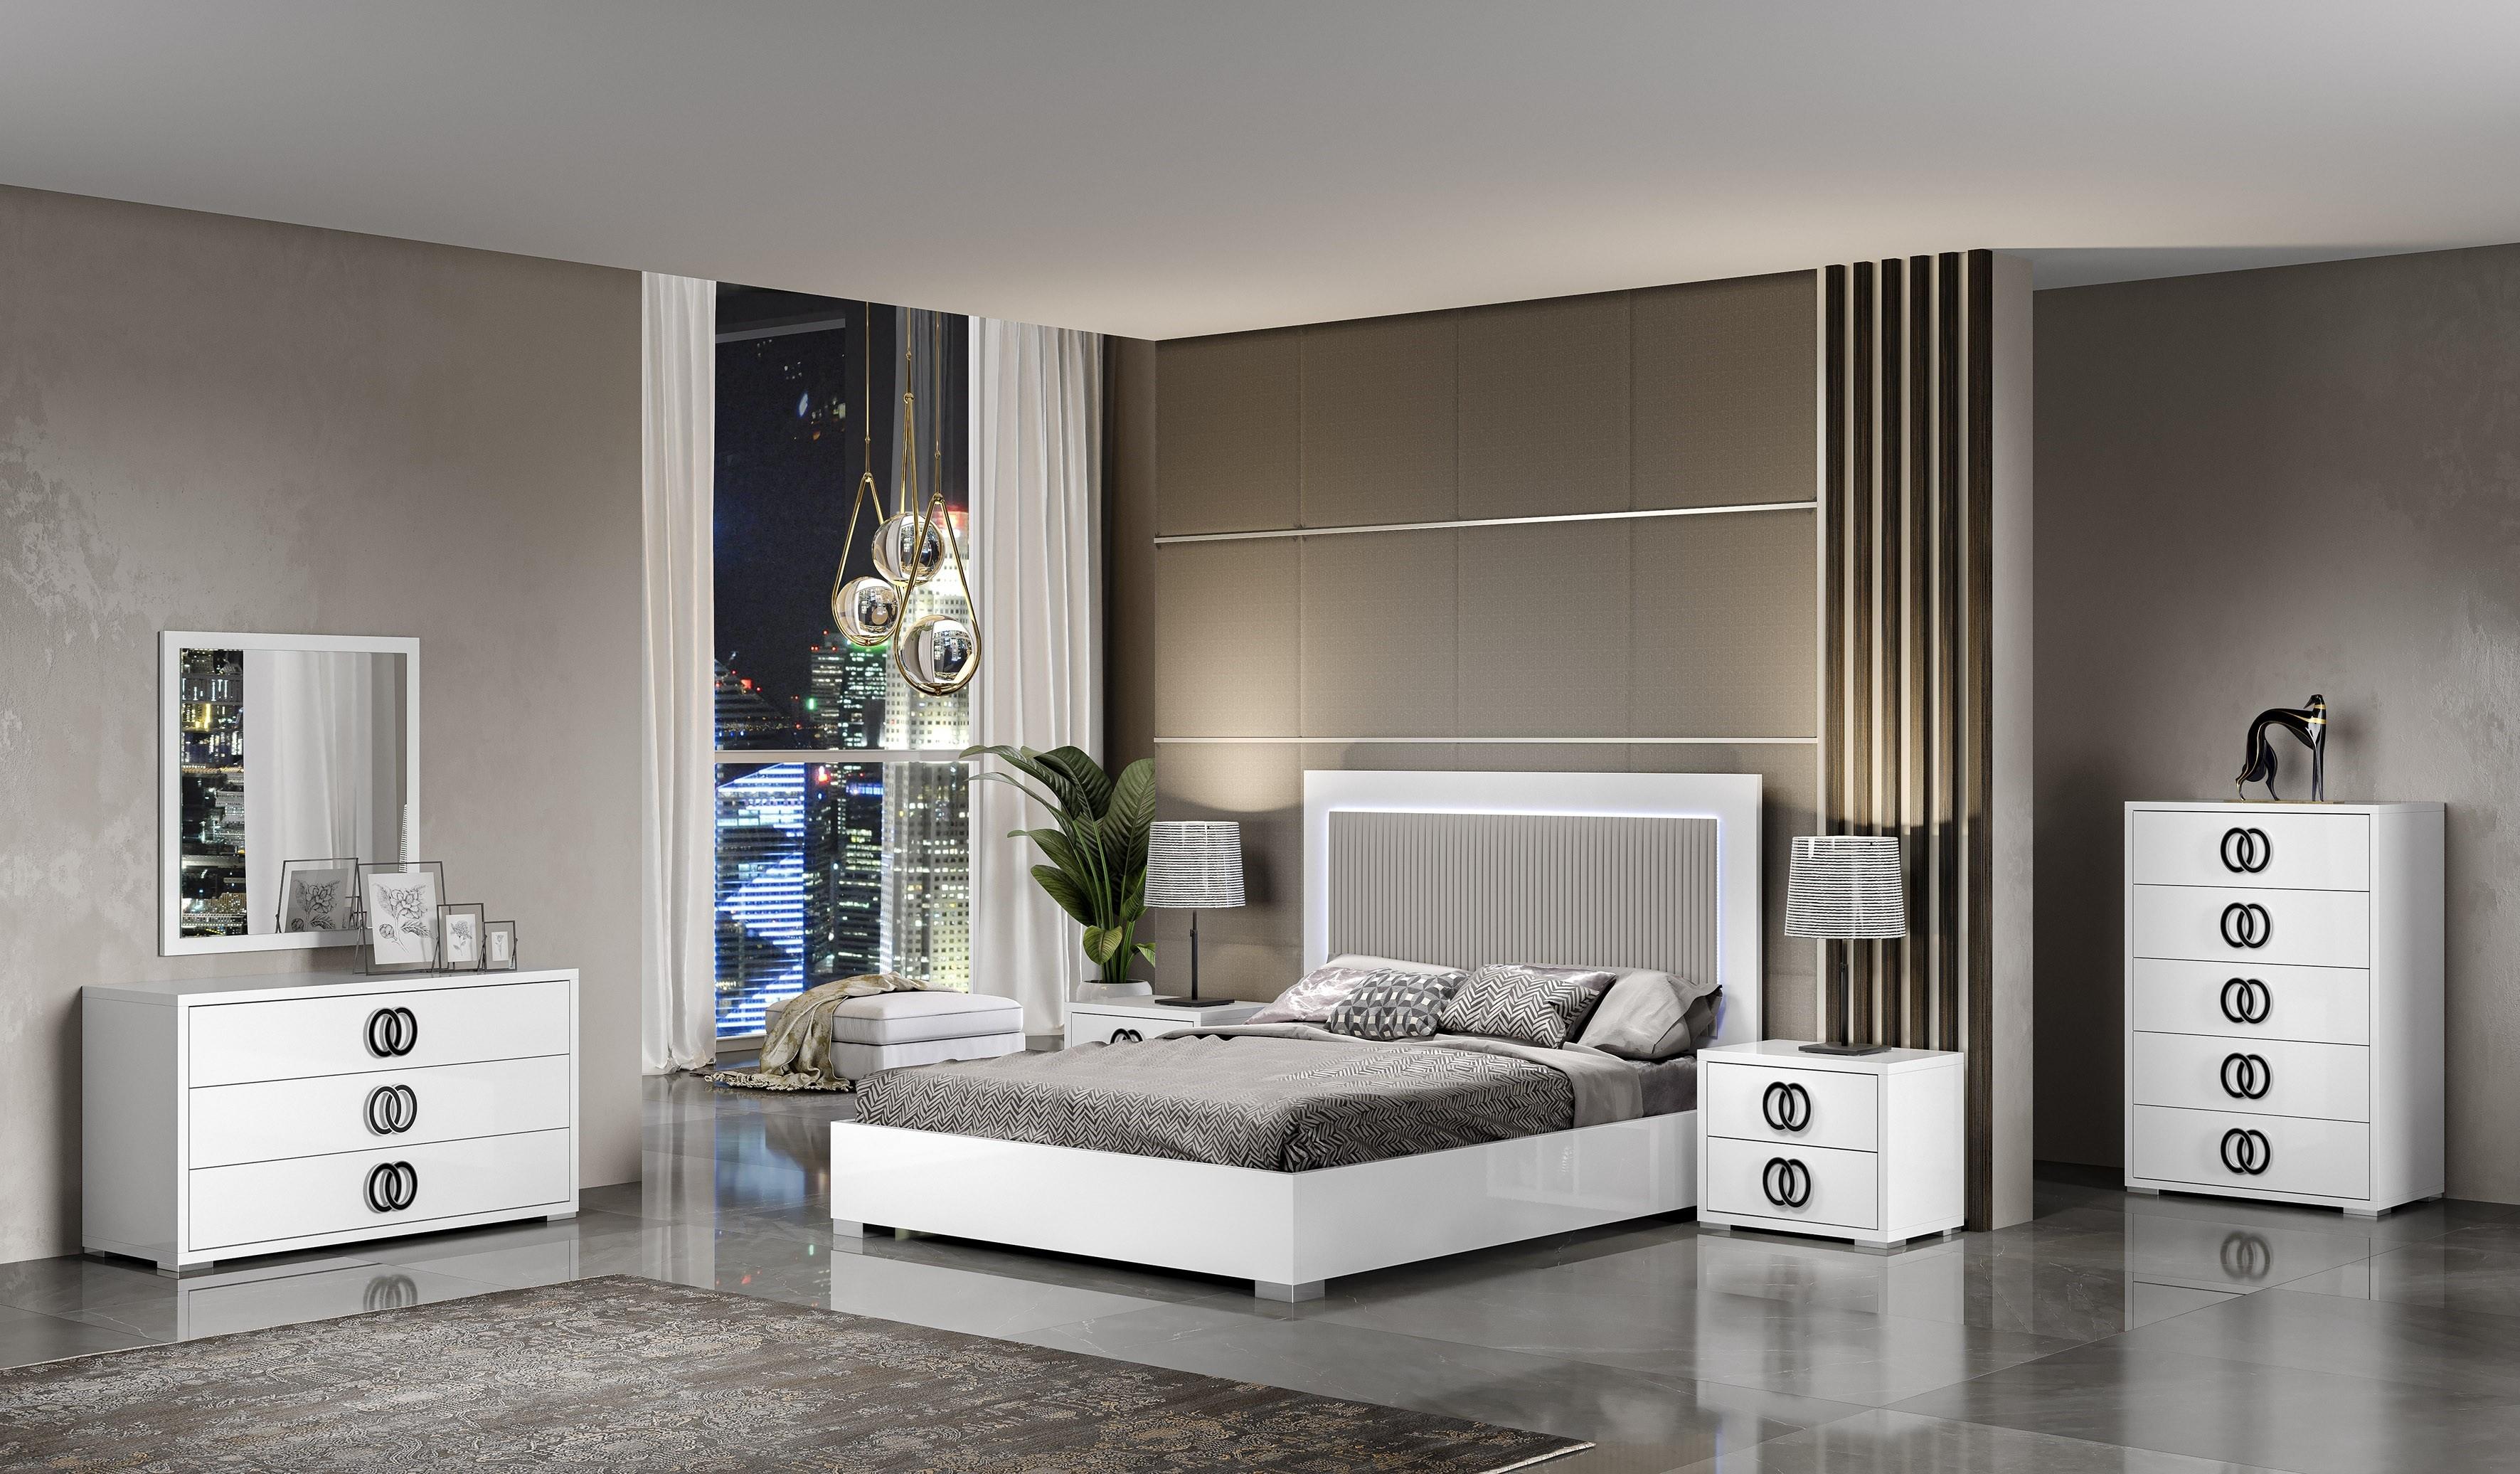 

    
Premium Queen Size Bedroom Set 6Pcs in White w/ LED light MADE IN ITALY J&M Luxuria
